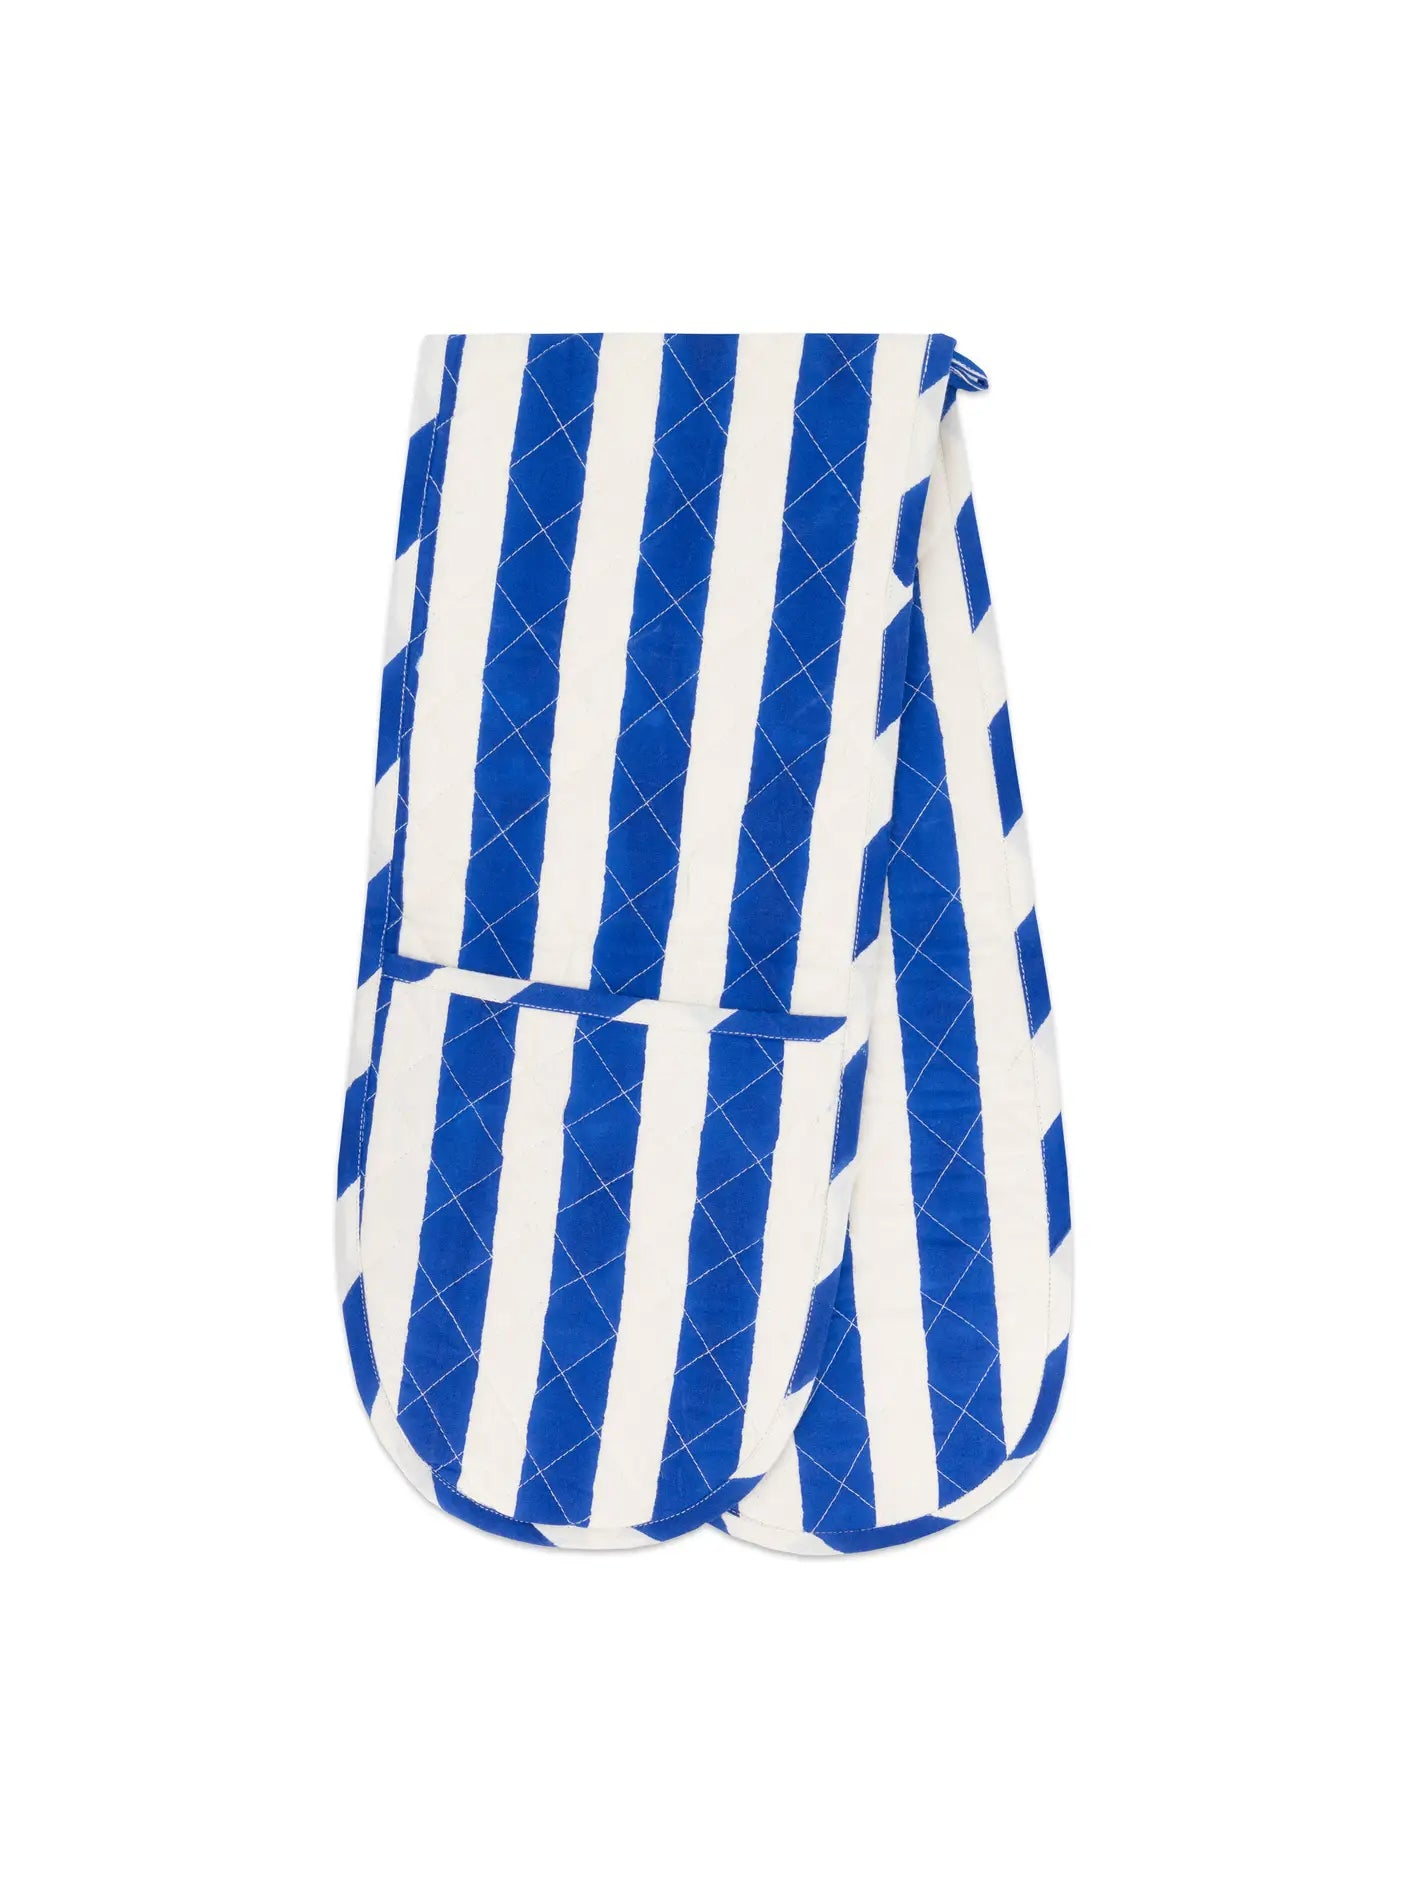 double oven mitt in blue and white stripe